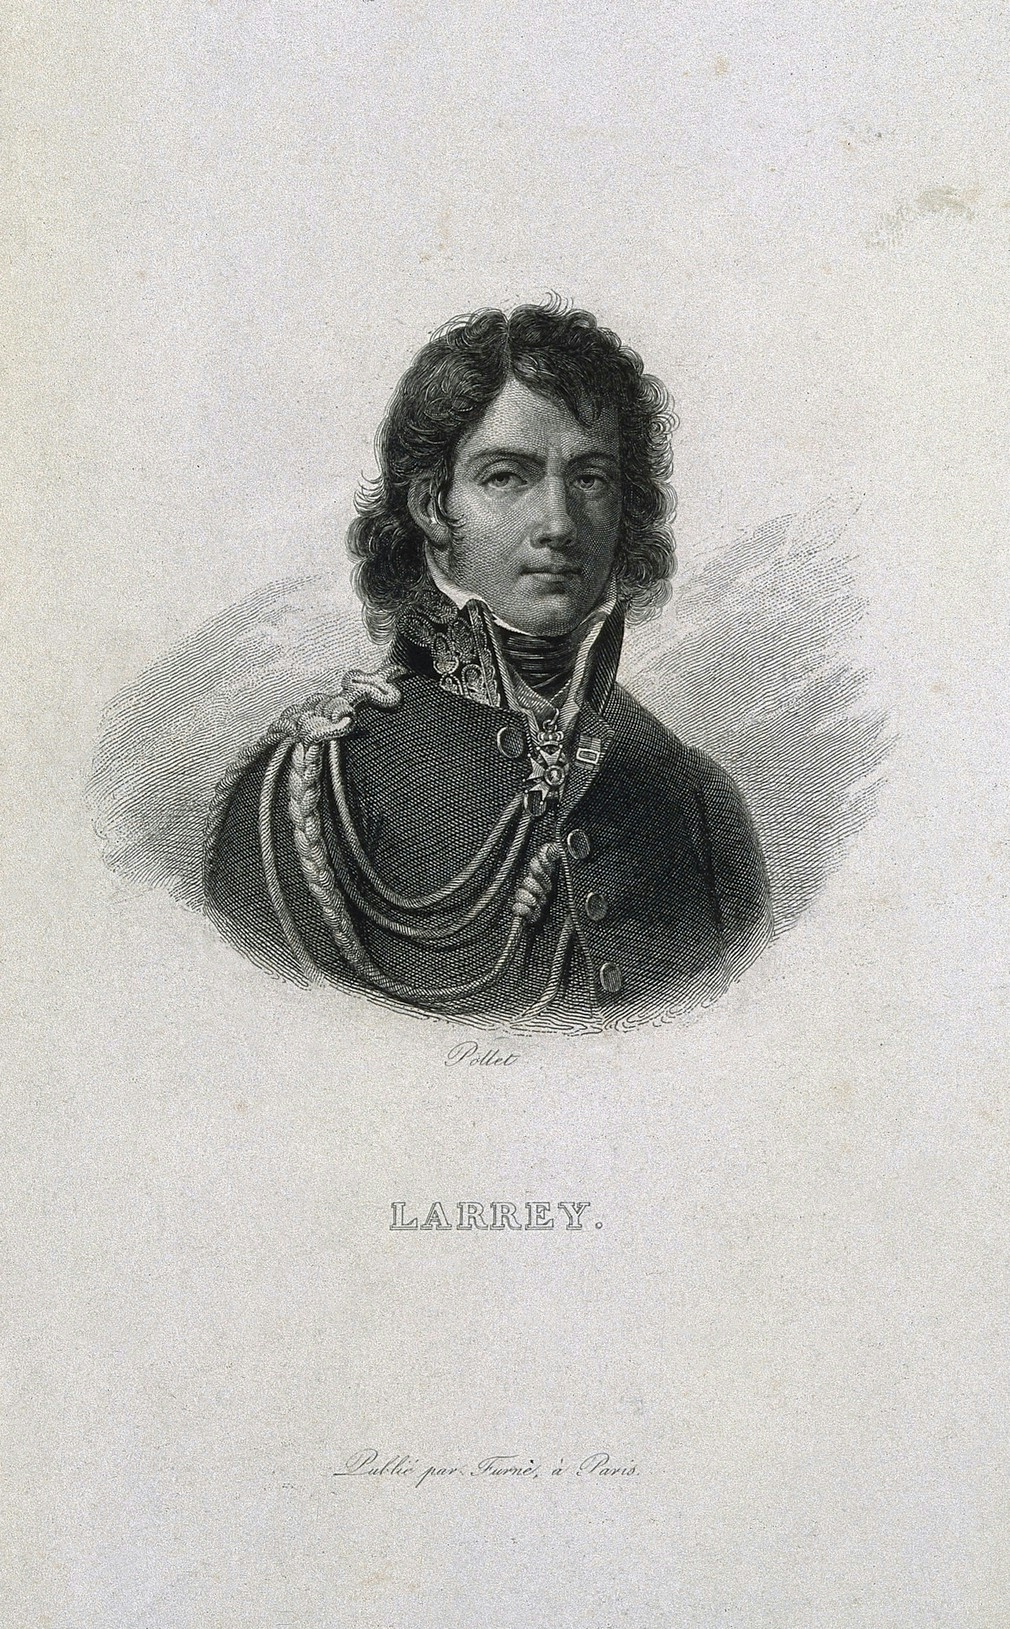 Dark etching portrait of a man with curly hair and elaborate military coat.